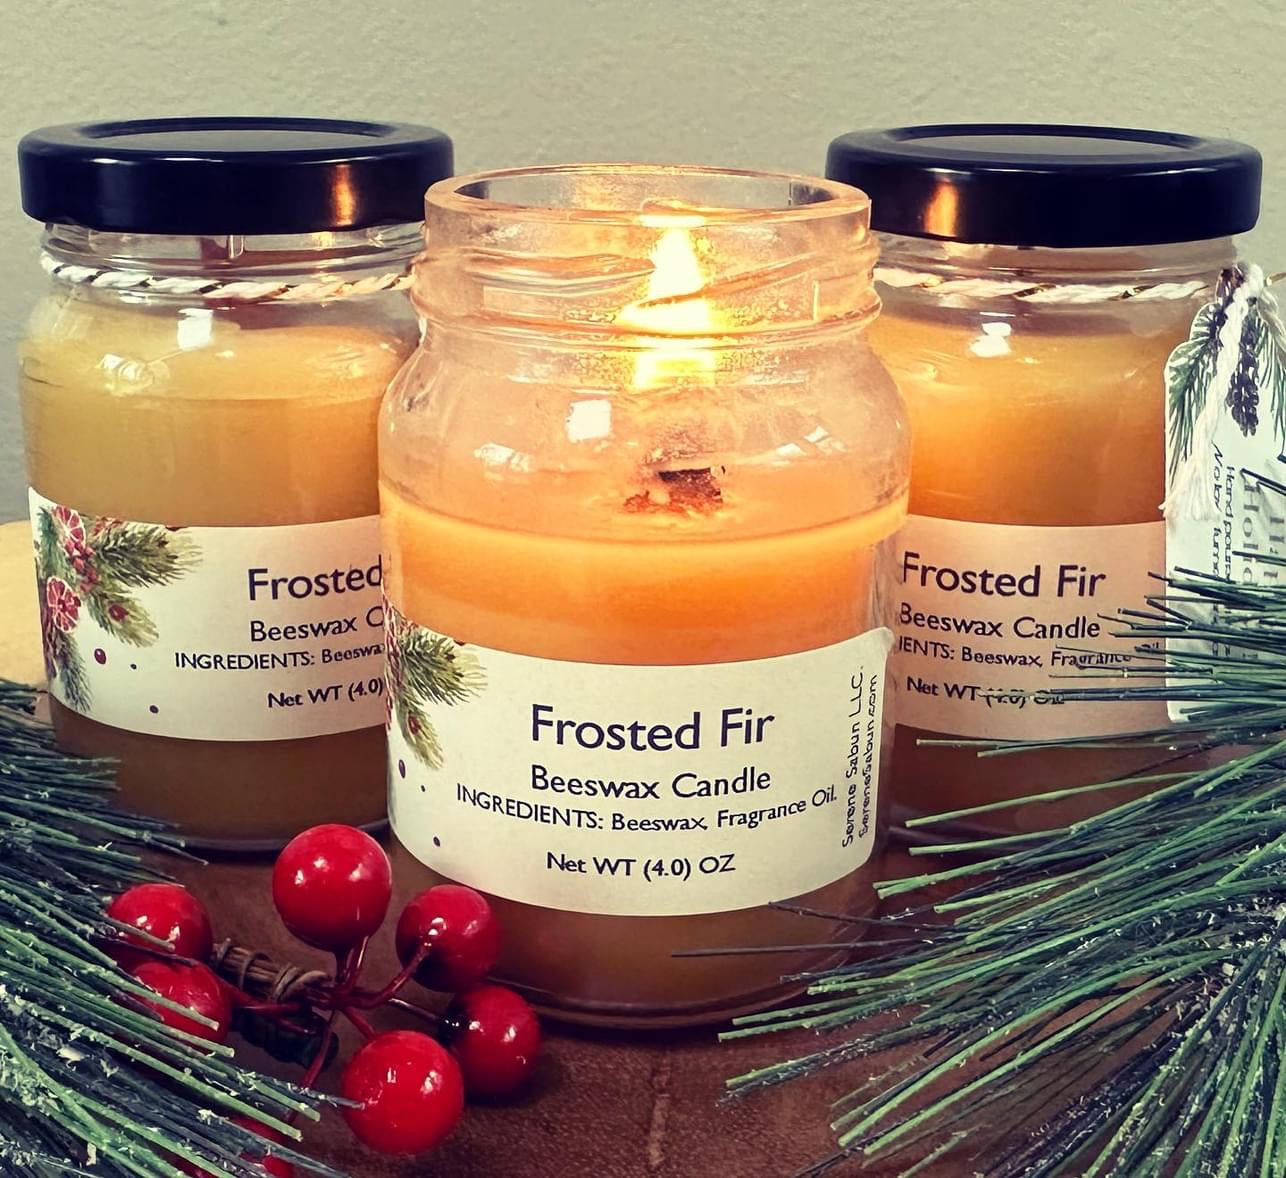 Frosted Fir Beeswax Candles